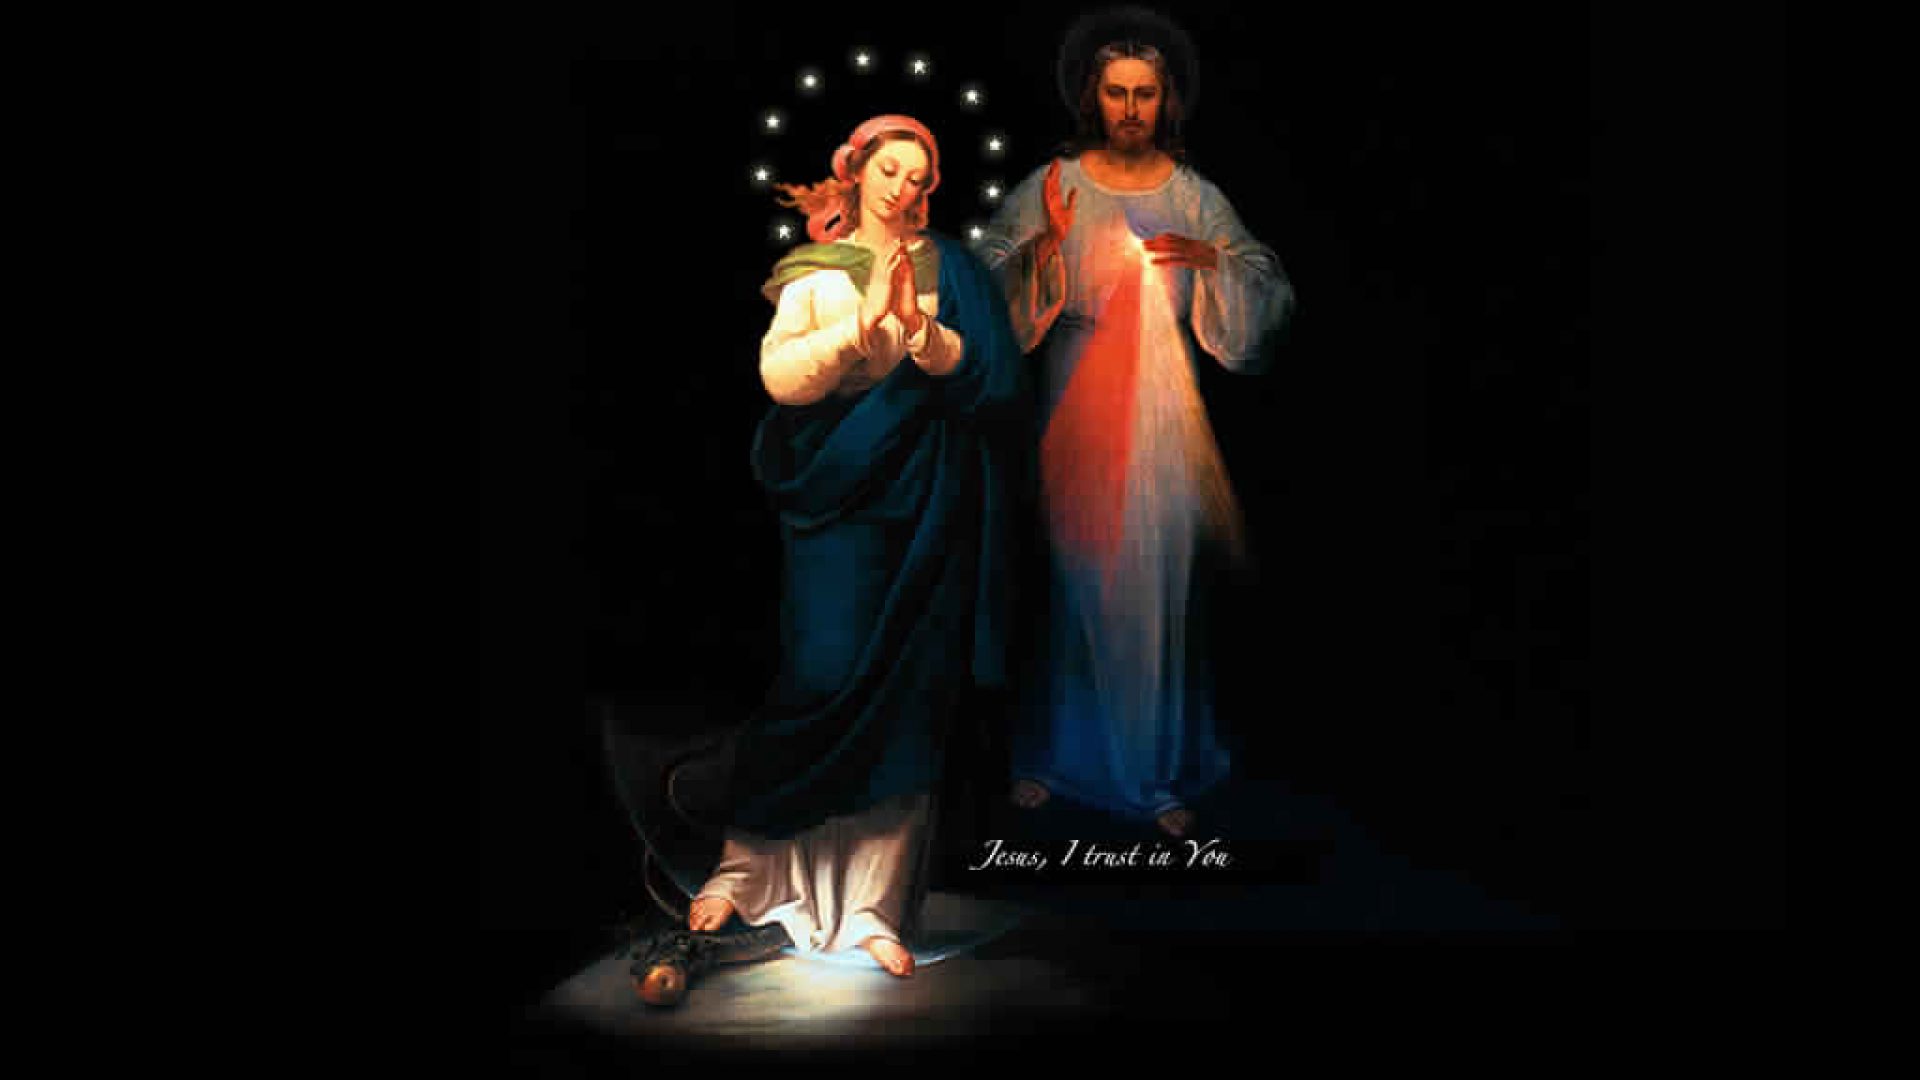 Jesus And Mother Mary Hd 3d Images Free Download - God HD Wallpapers